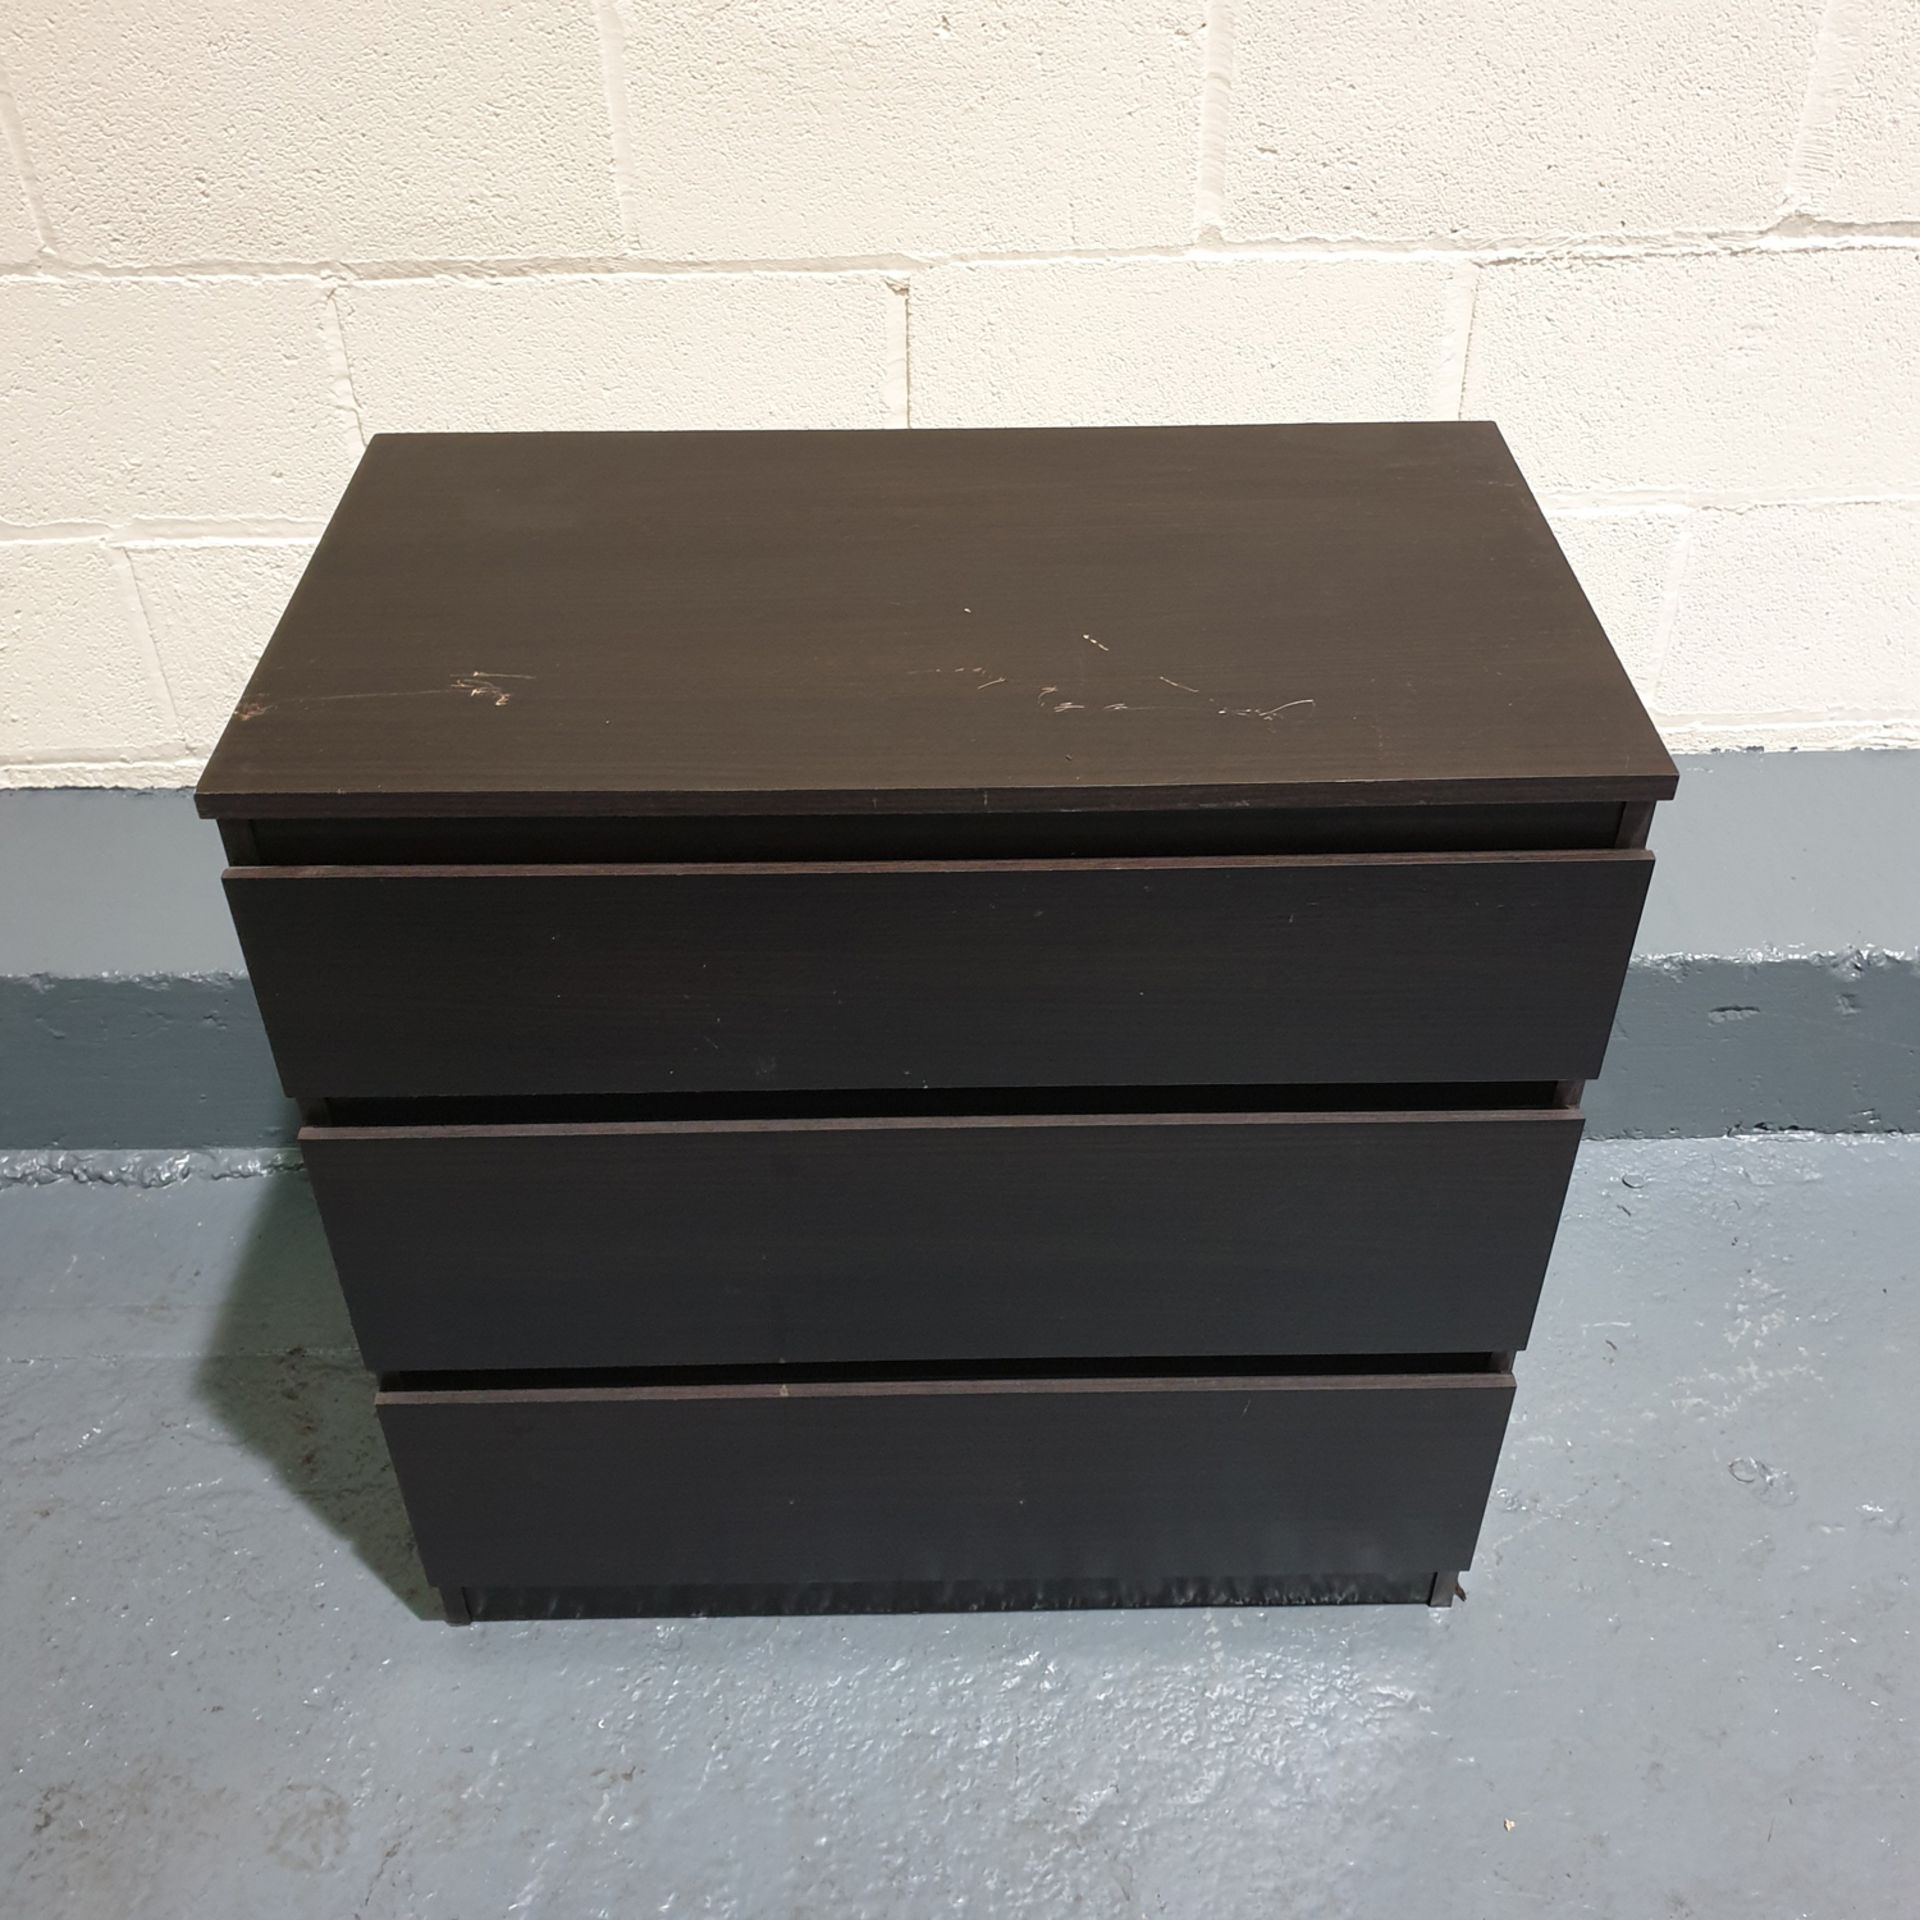 Set of Drawers. Approx Dimensions 700mm x 400mm x 710mm High.